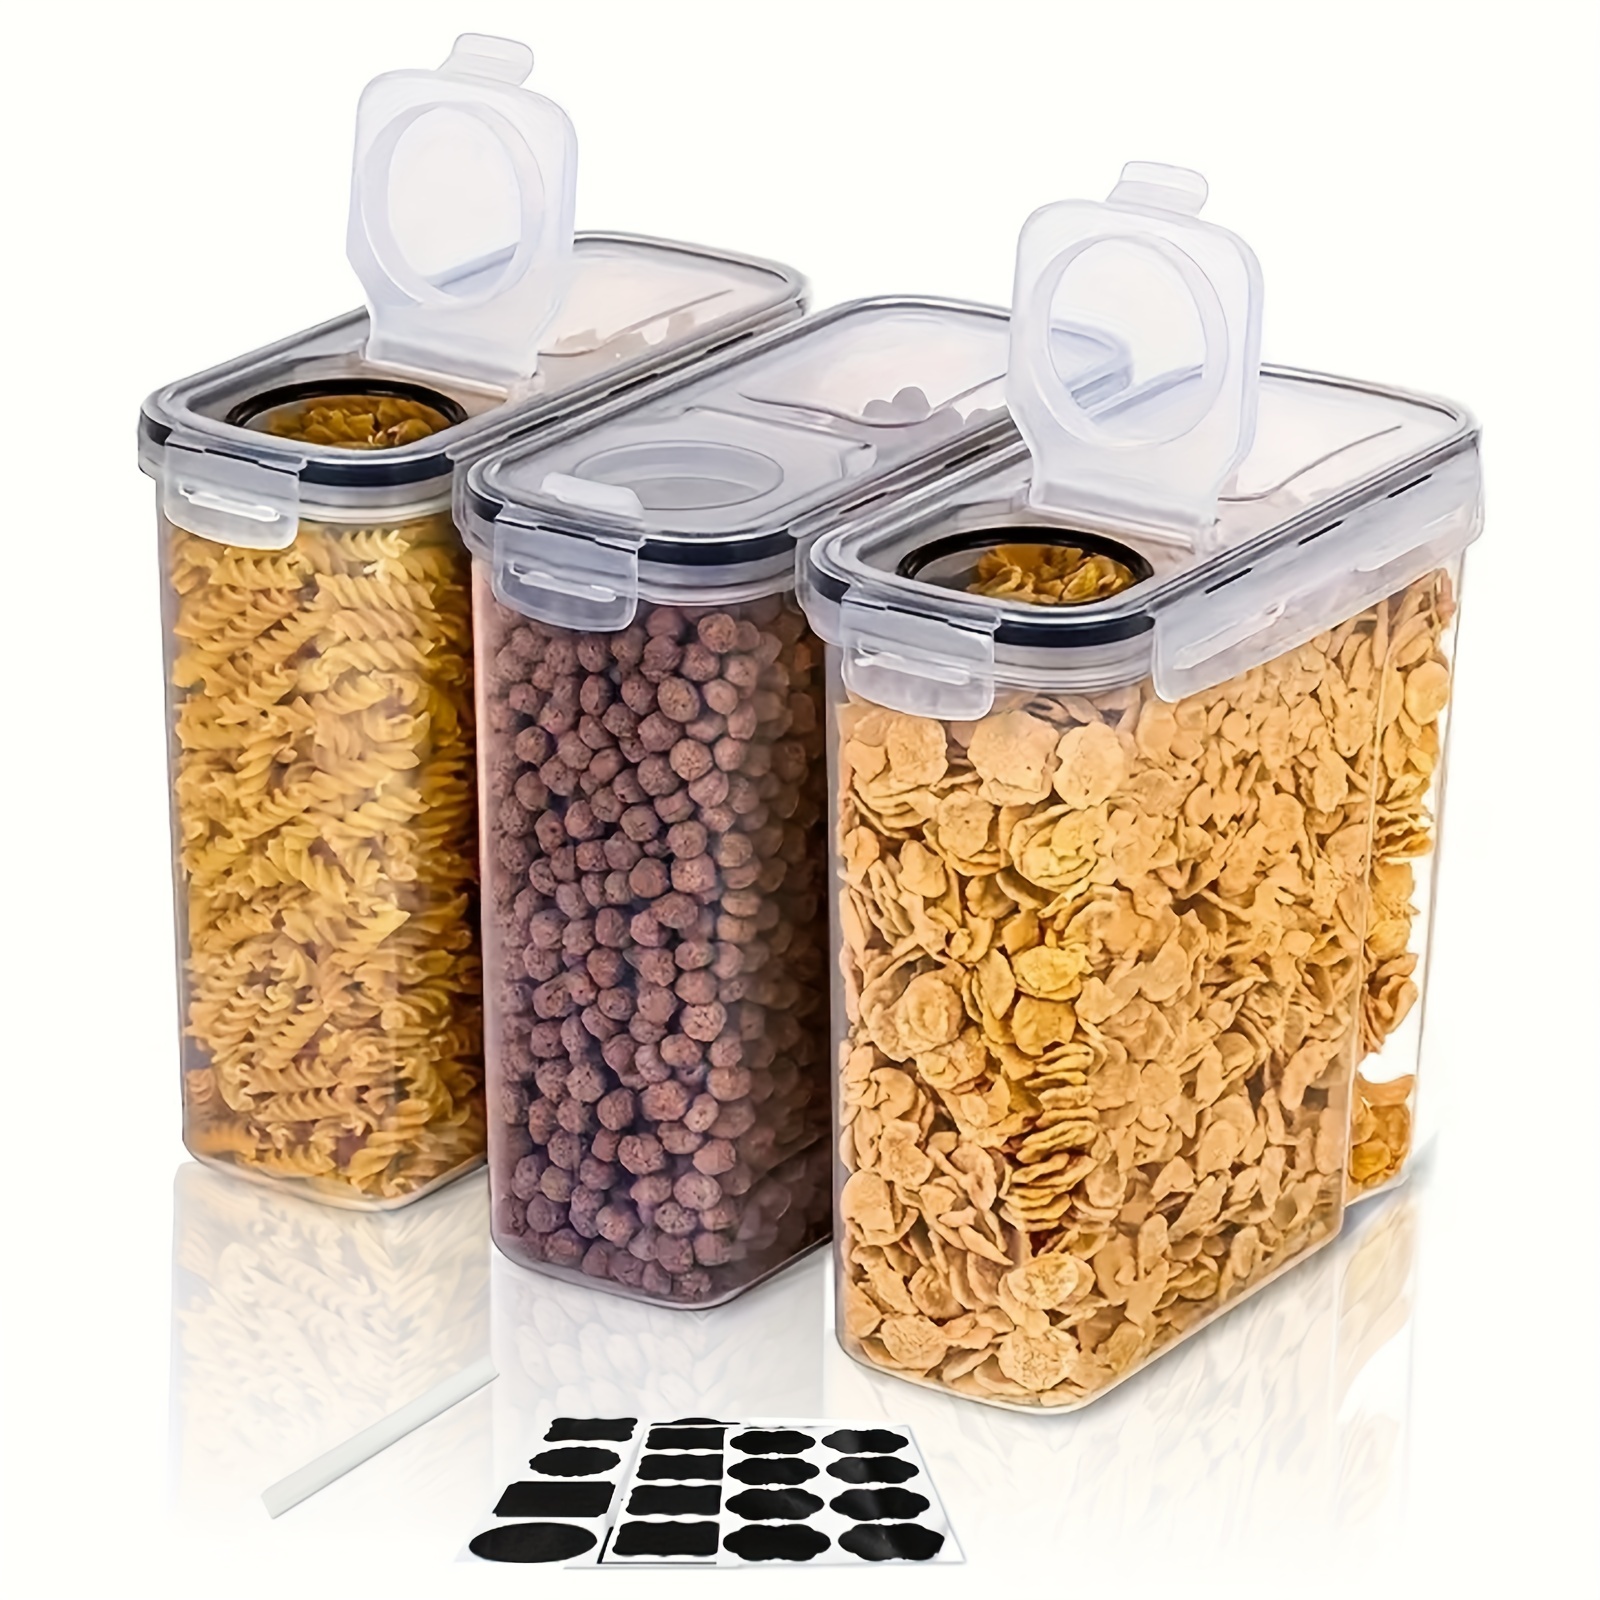 3pcs BPA-Free Cereal Storage Container Set with Lids - 2.5L Airtight Food Containers for Cereal, Snacks, and Sugar - Chalkboard Labels and Marker Included - Dishwasher Safe - Kitchen Supplies